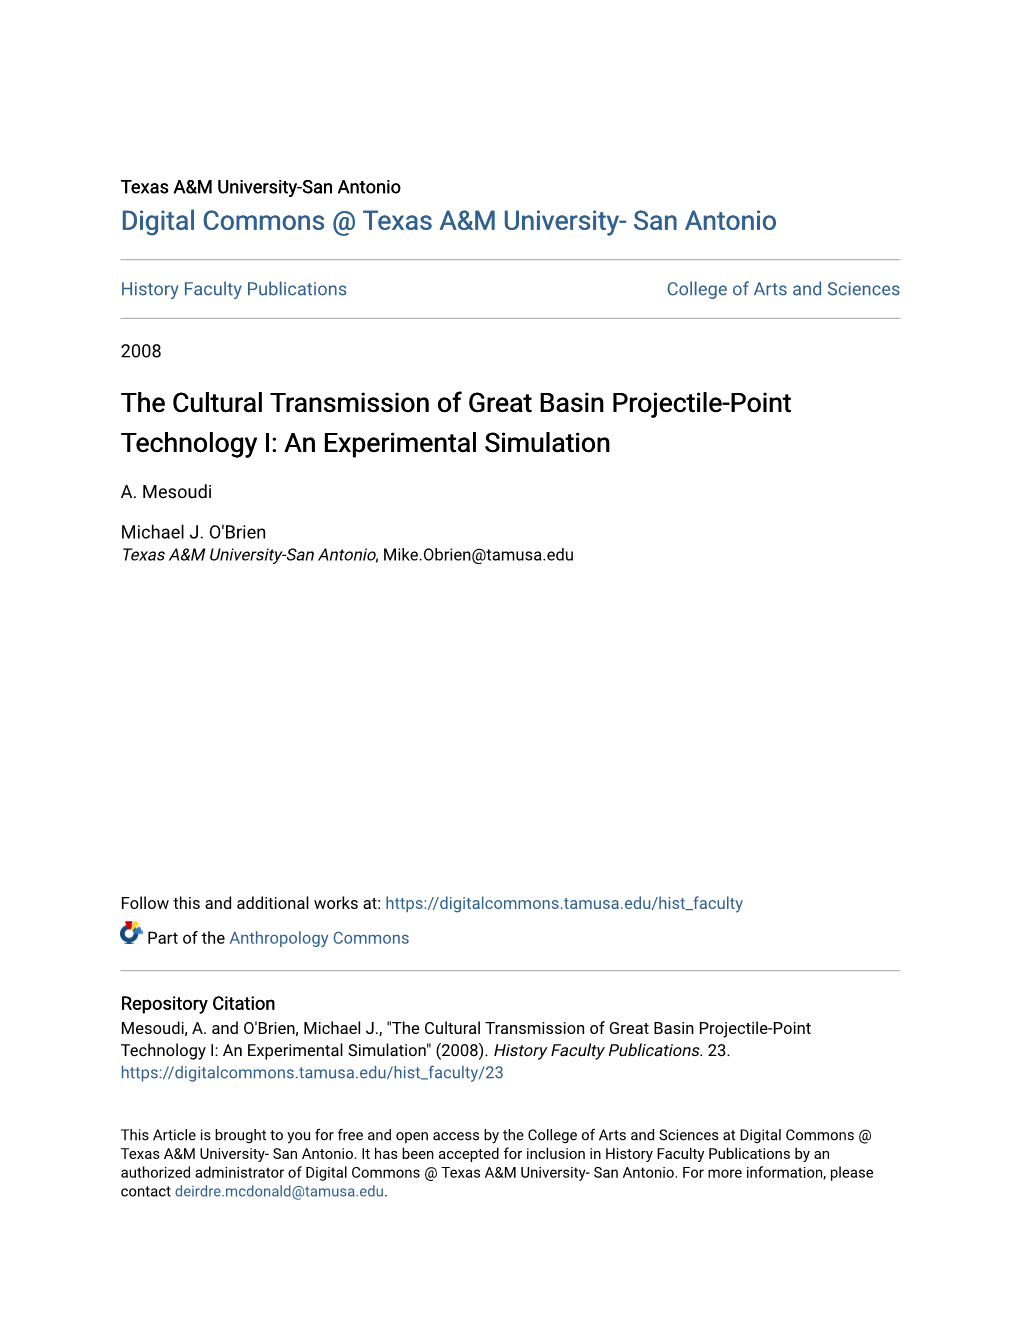 The Cultural Transmission of Great Basin Projectile-Point Technology I: an Experimental Simulation